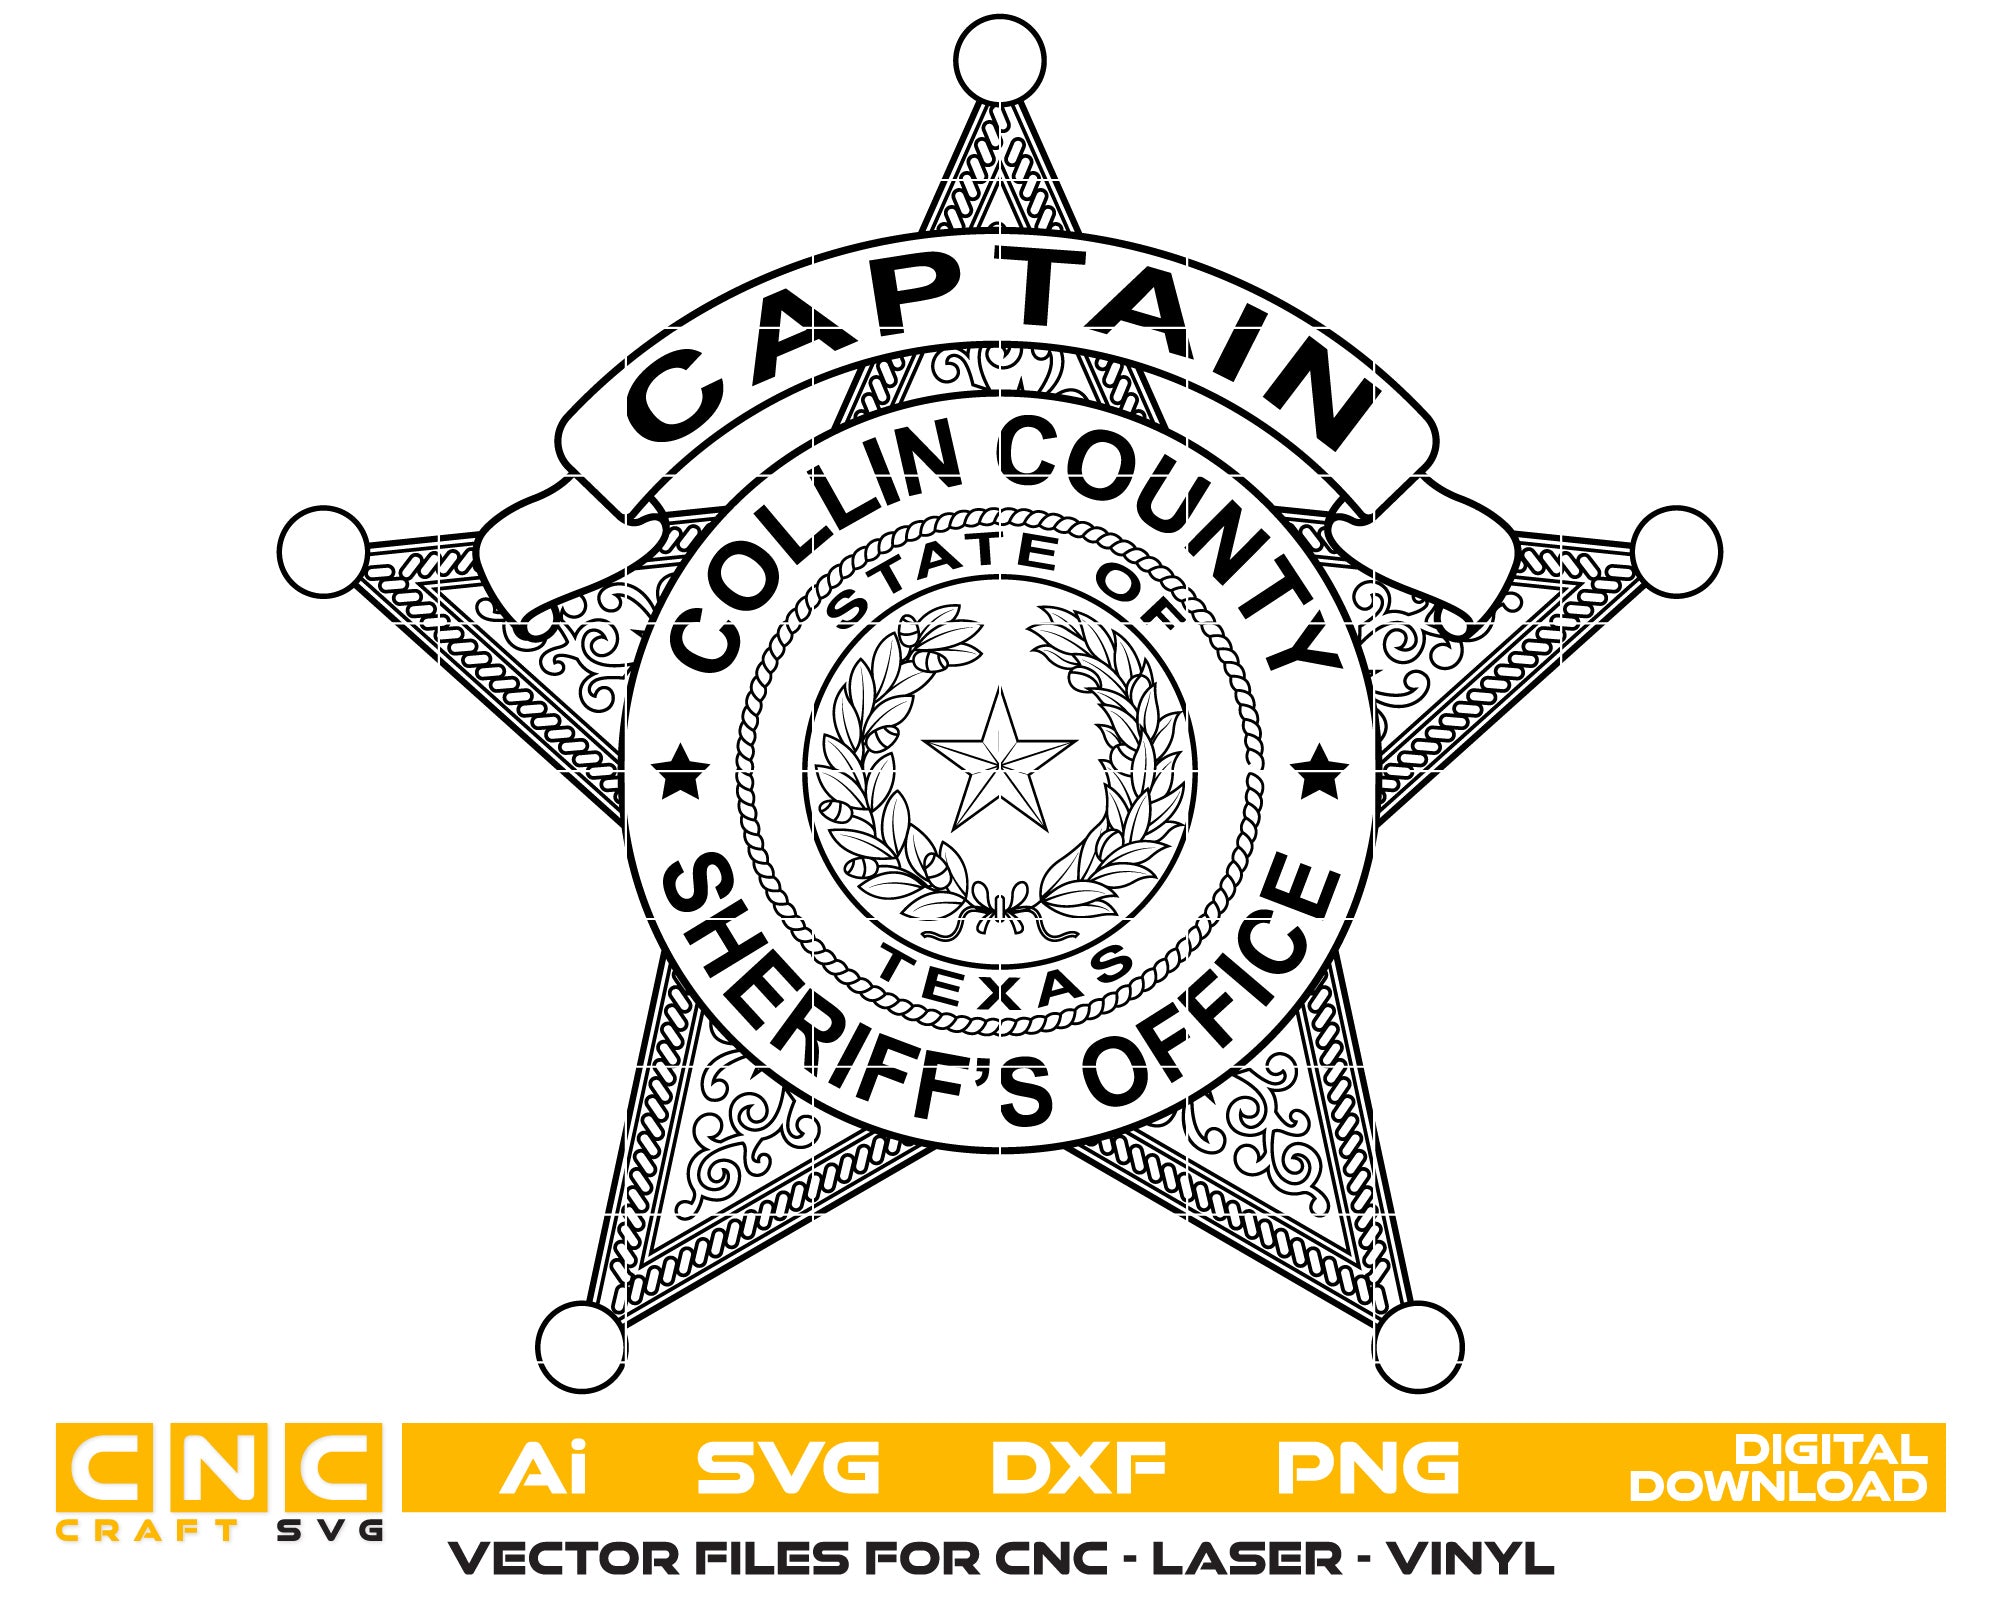 Collin County Sheriff Captain Badge Vector Art, Ai,SVG, DXF, PNG, Digital Files